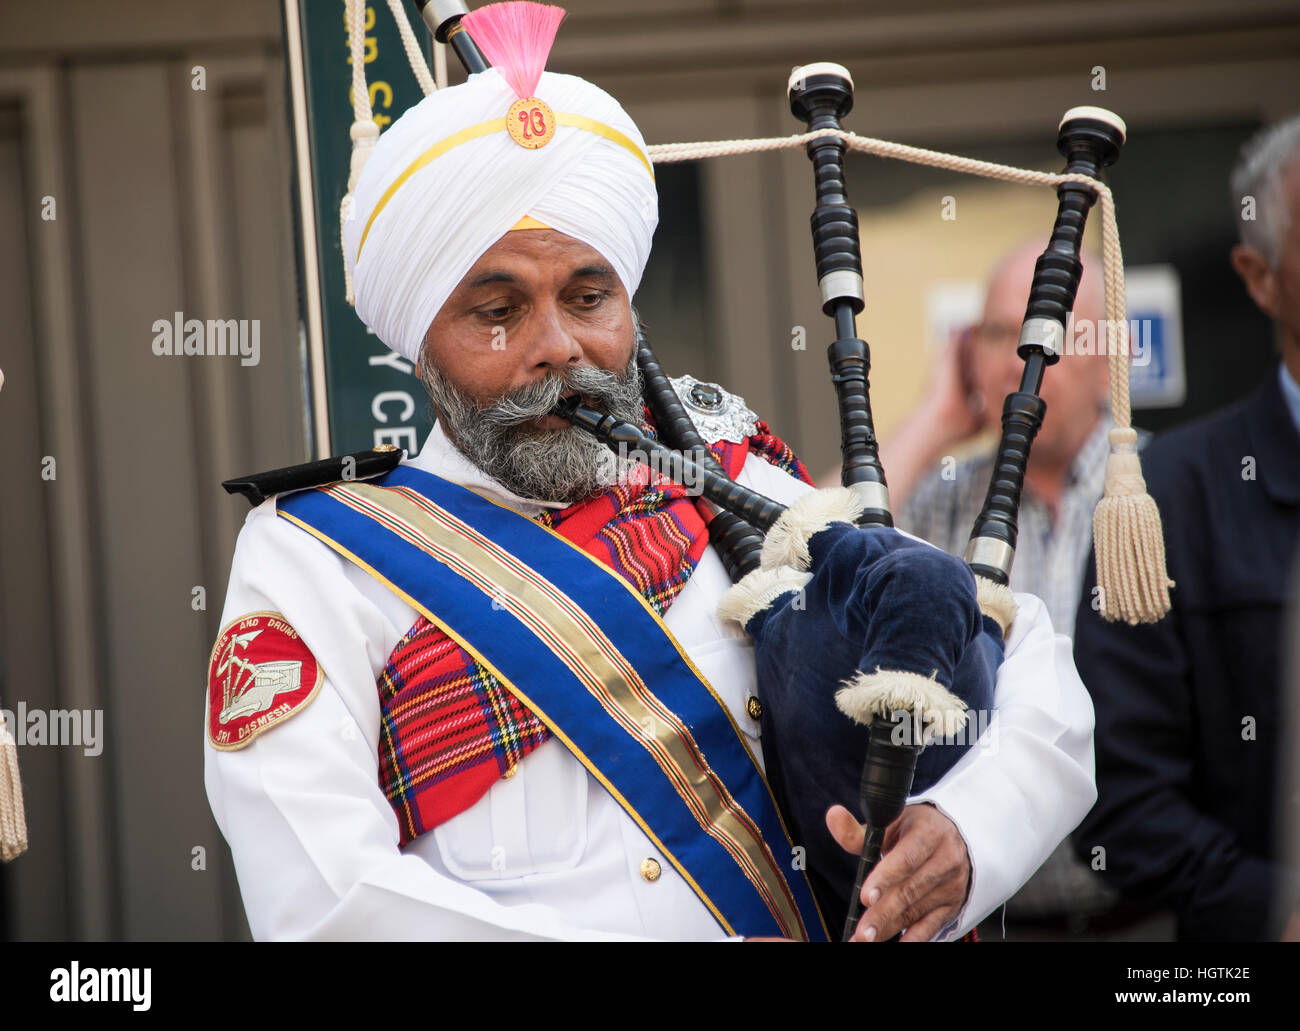 Member of  the Sri Dasmesh Pipe Band of  Malaysian performing in Glasgow. Stock Photo